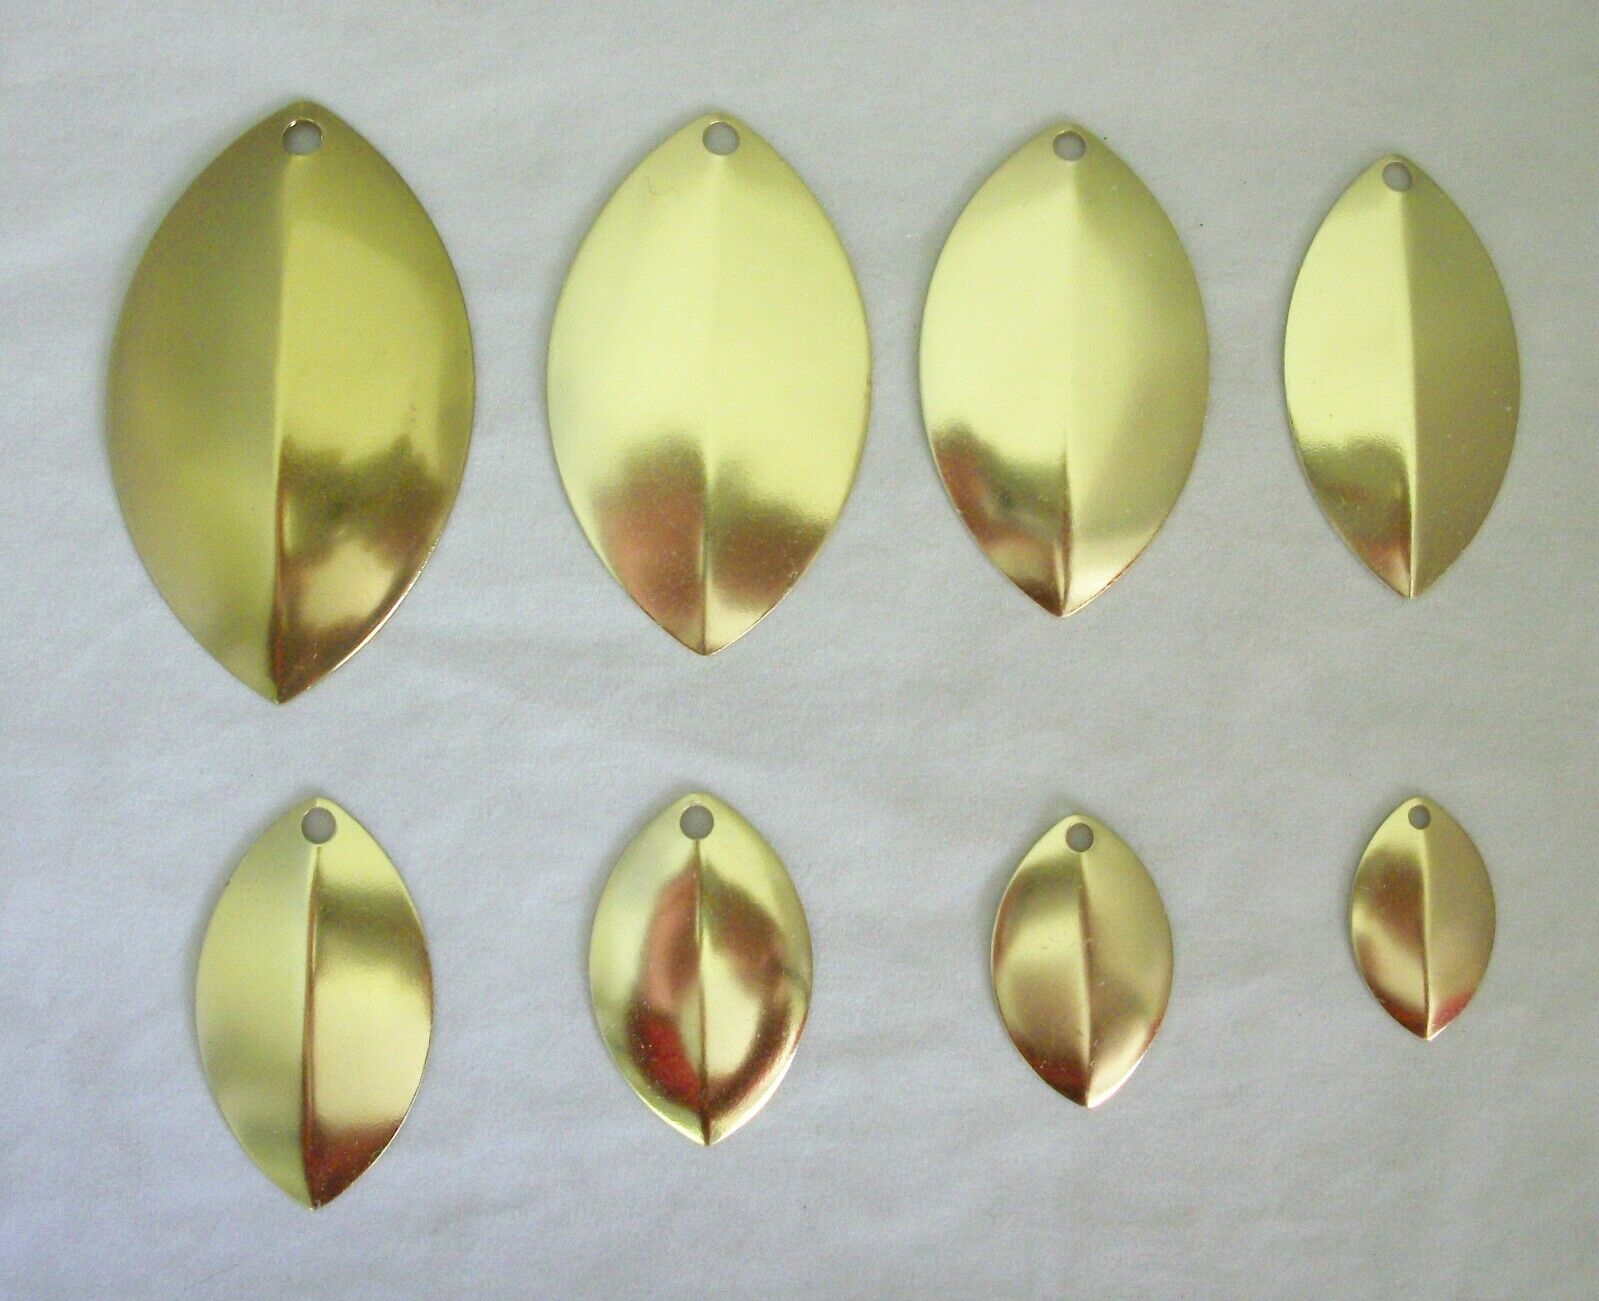 Turtle Back Blades Smooth Brass choose sizes #2,#3,#4,#4.5,#5,#5.5,#6,#7  (5 ct)